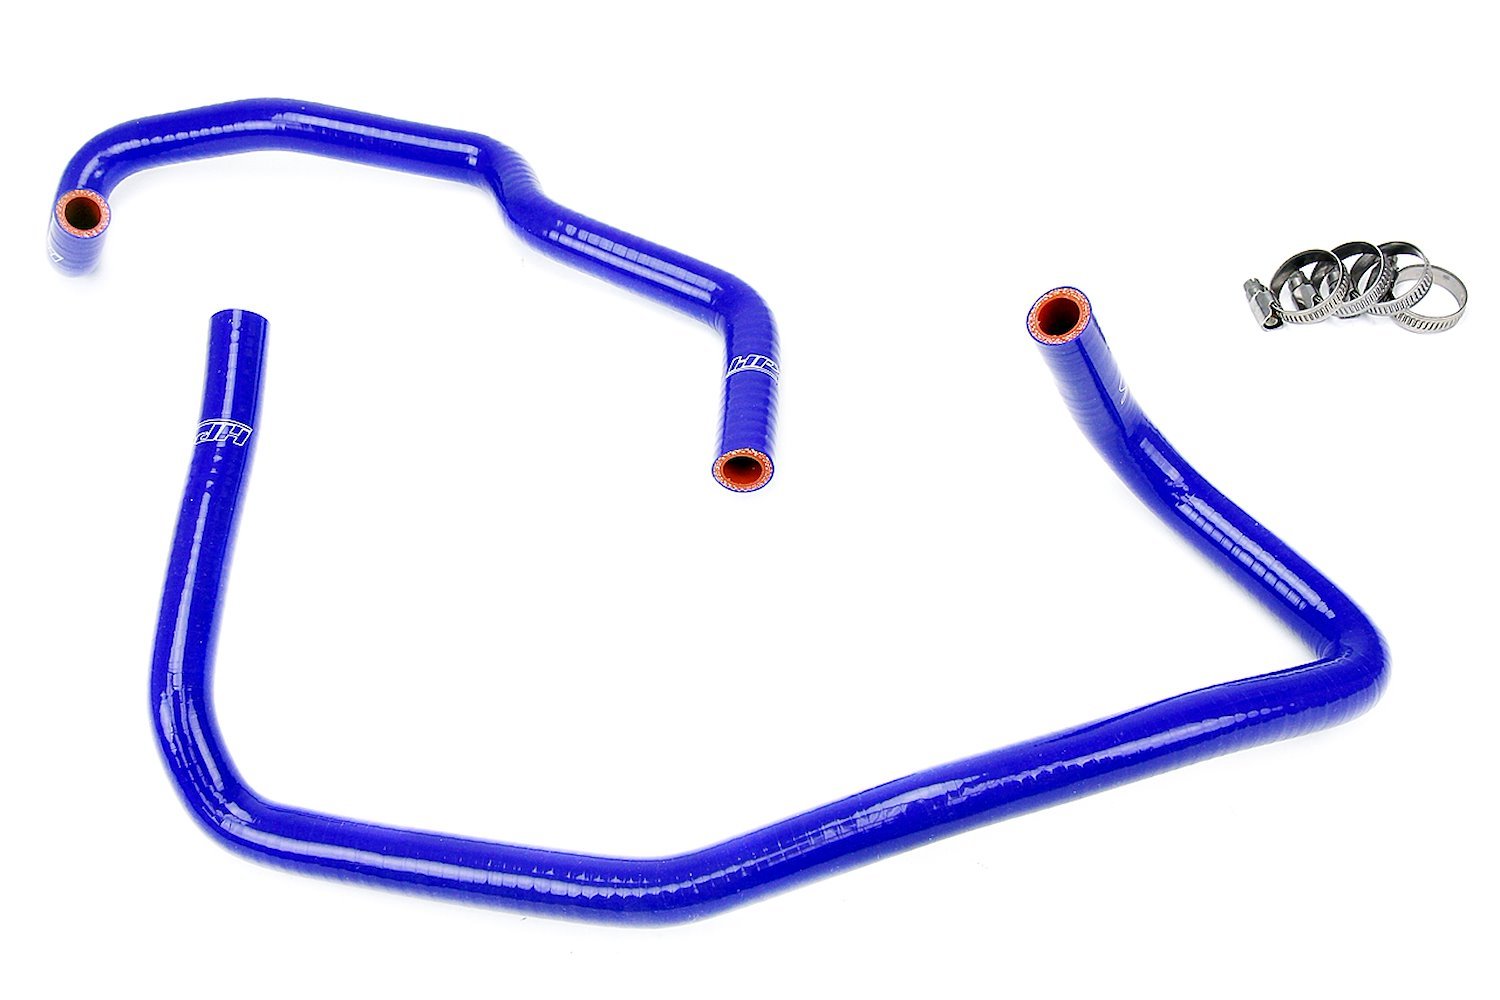 57-1468-BLUE Heater Hose Kit, High-Temp 3-Ply Reinforced Silicone, Replace OEM Rubber Heater Coolant Hoses